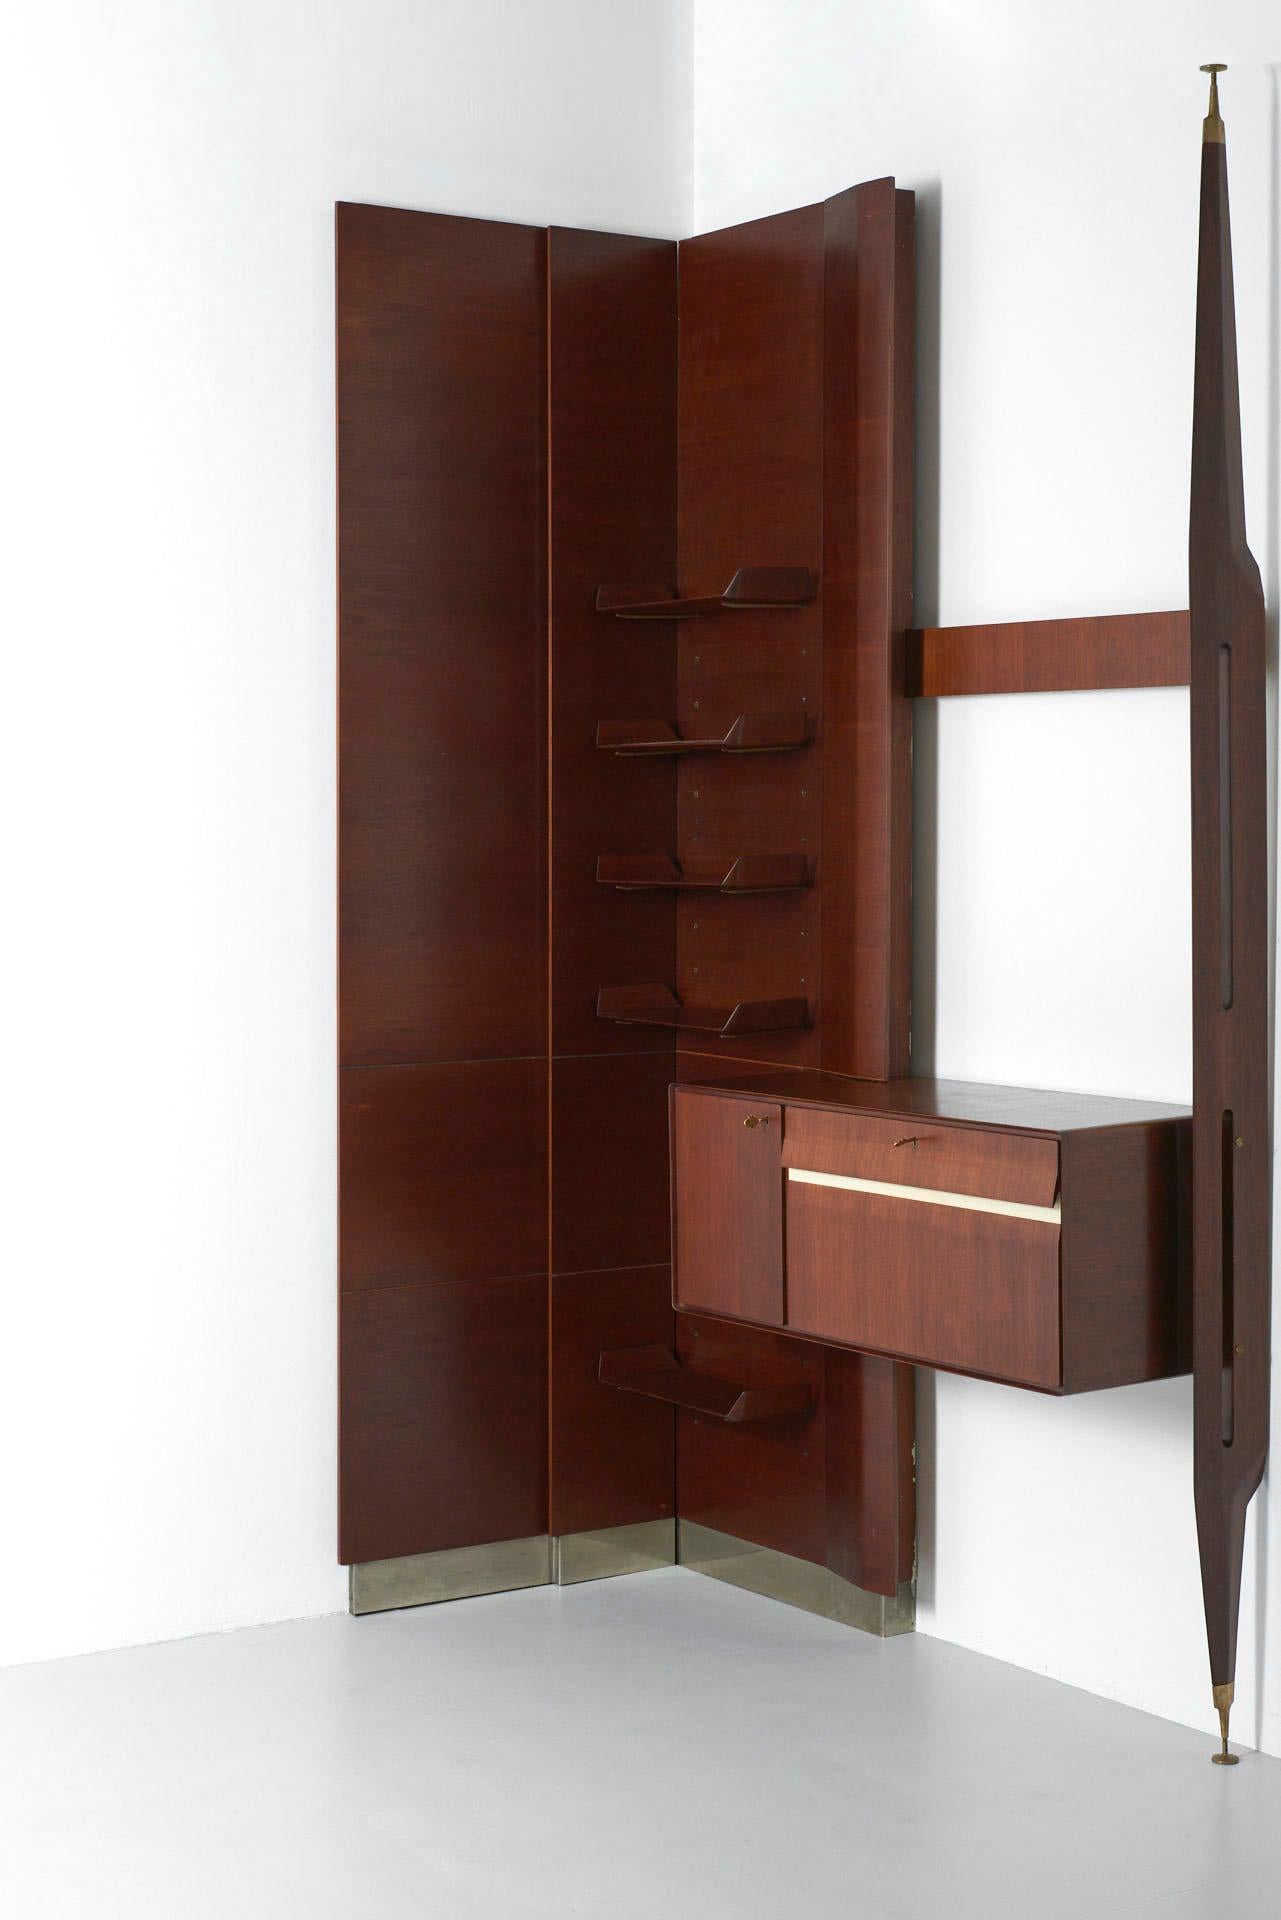 An Italian wall unit with shelves and a cabinet. The supports of the shelves are in solid brass. The height of the panels is 303cm, the endcaps of the pole can be adjusted in height. The system should be fixed to the wall, therefore it can be placed